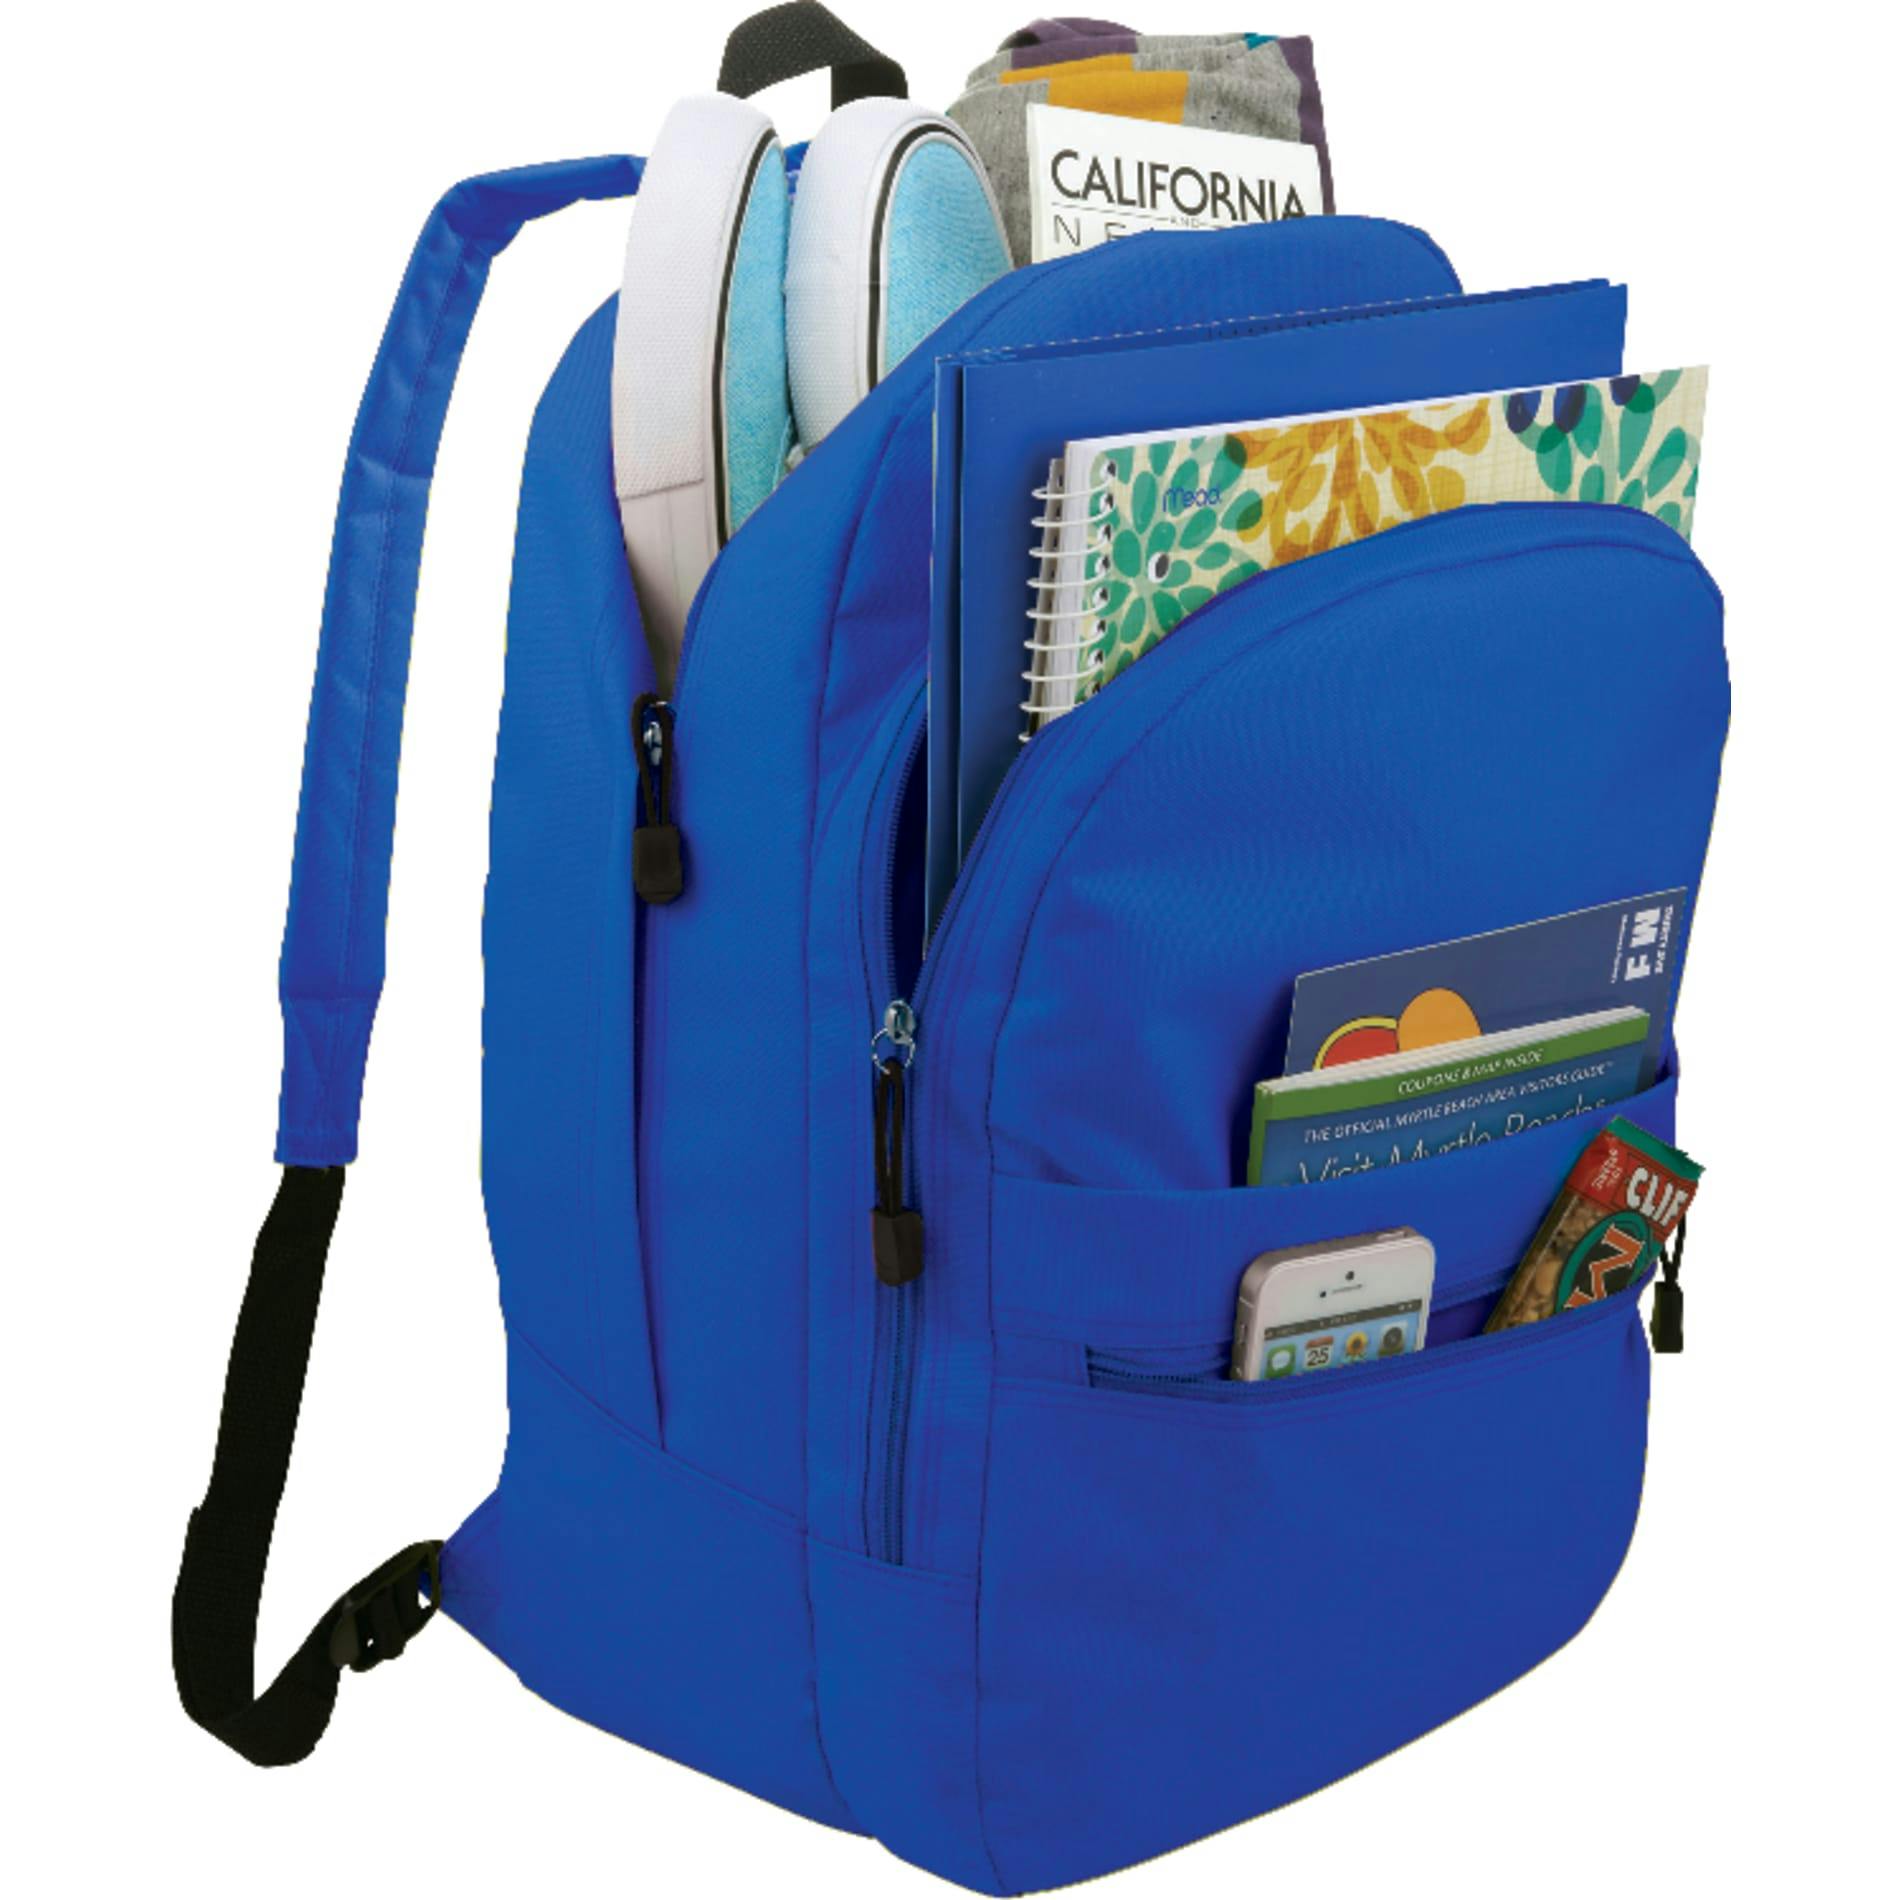 Classic Deluxe Backpack - additional Image 1